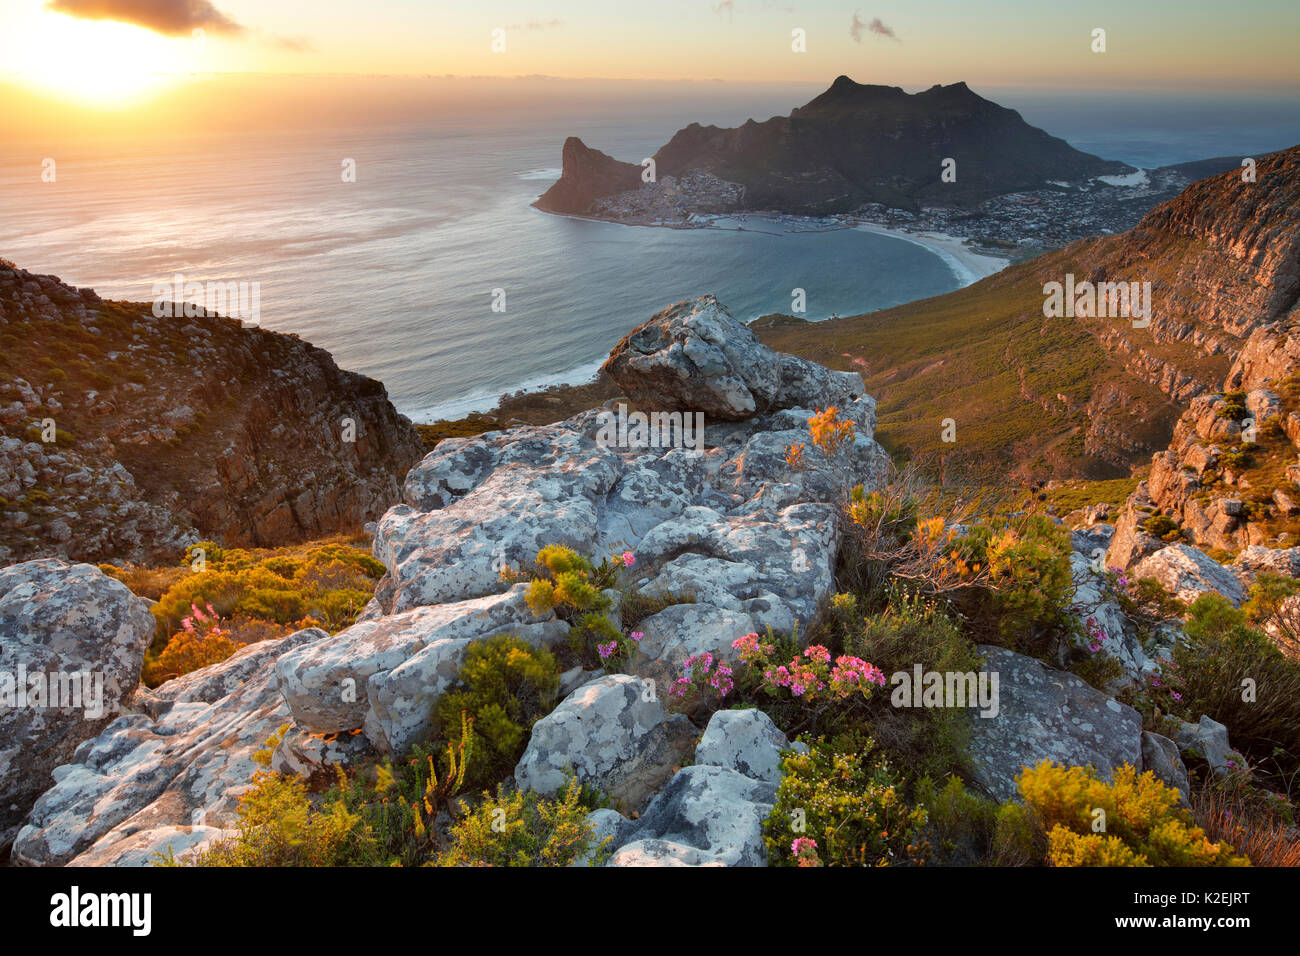 Hout Bay, dal Table Mountain National Park, Western Cape, Sud Africa, dicembre 2014. Foto Stock